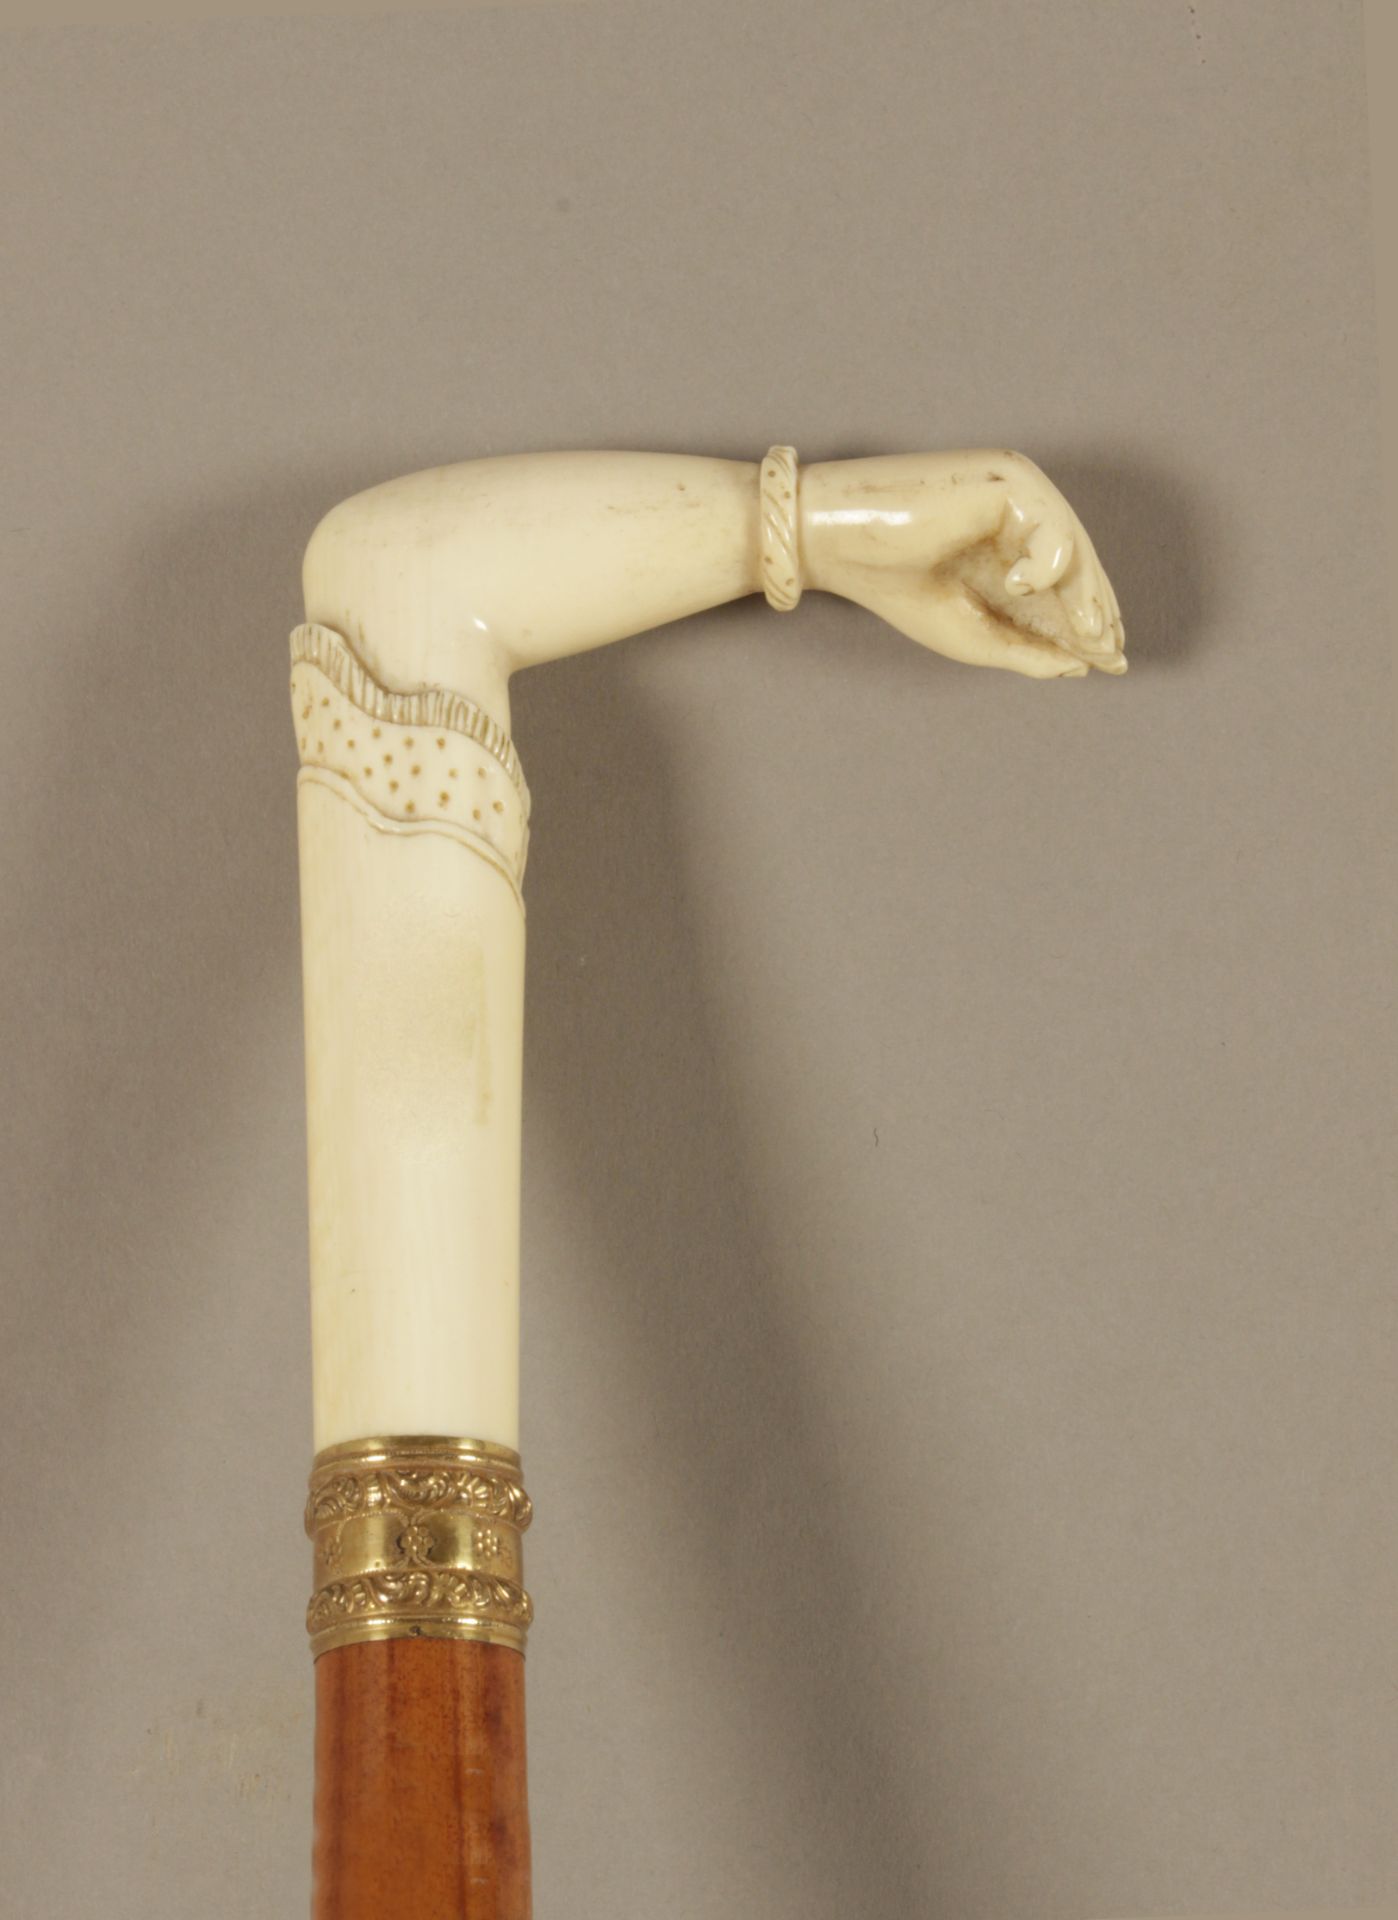 A 19th century possiibly Indian walking cane in carved fruitwood and ivory